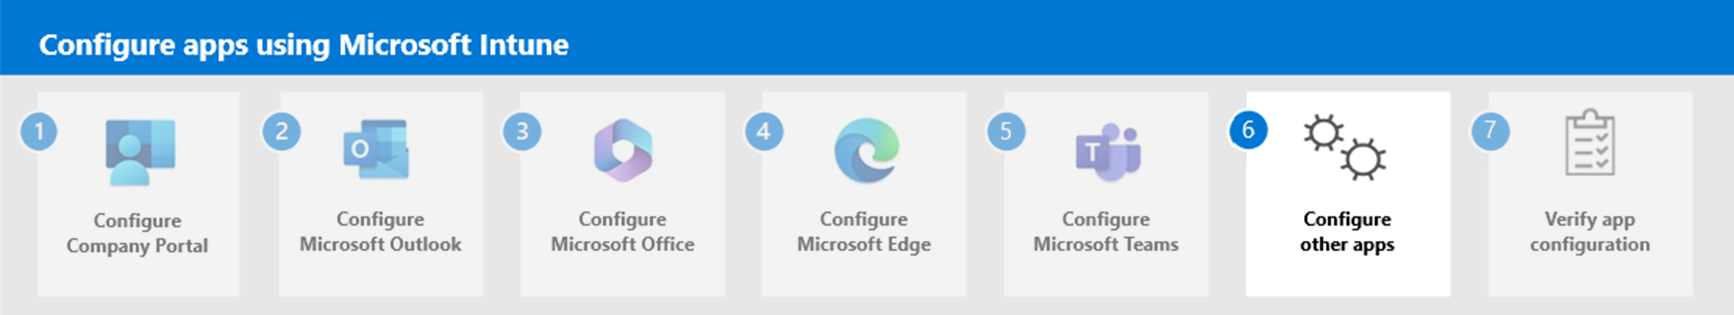 Step 6 - Configure other apps